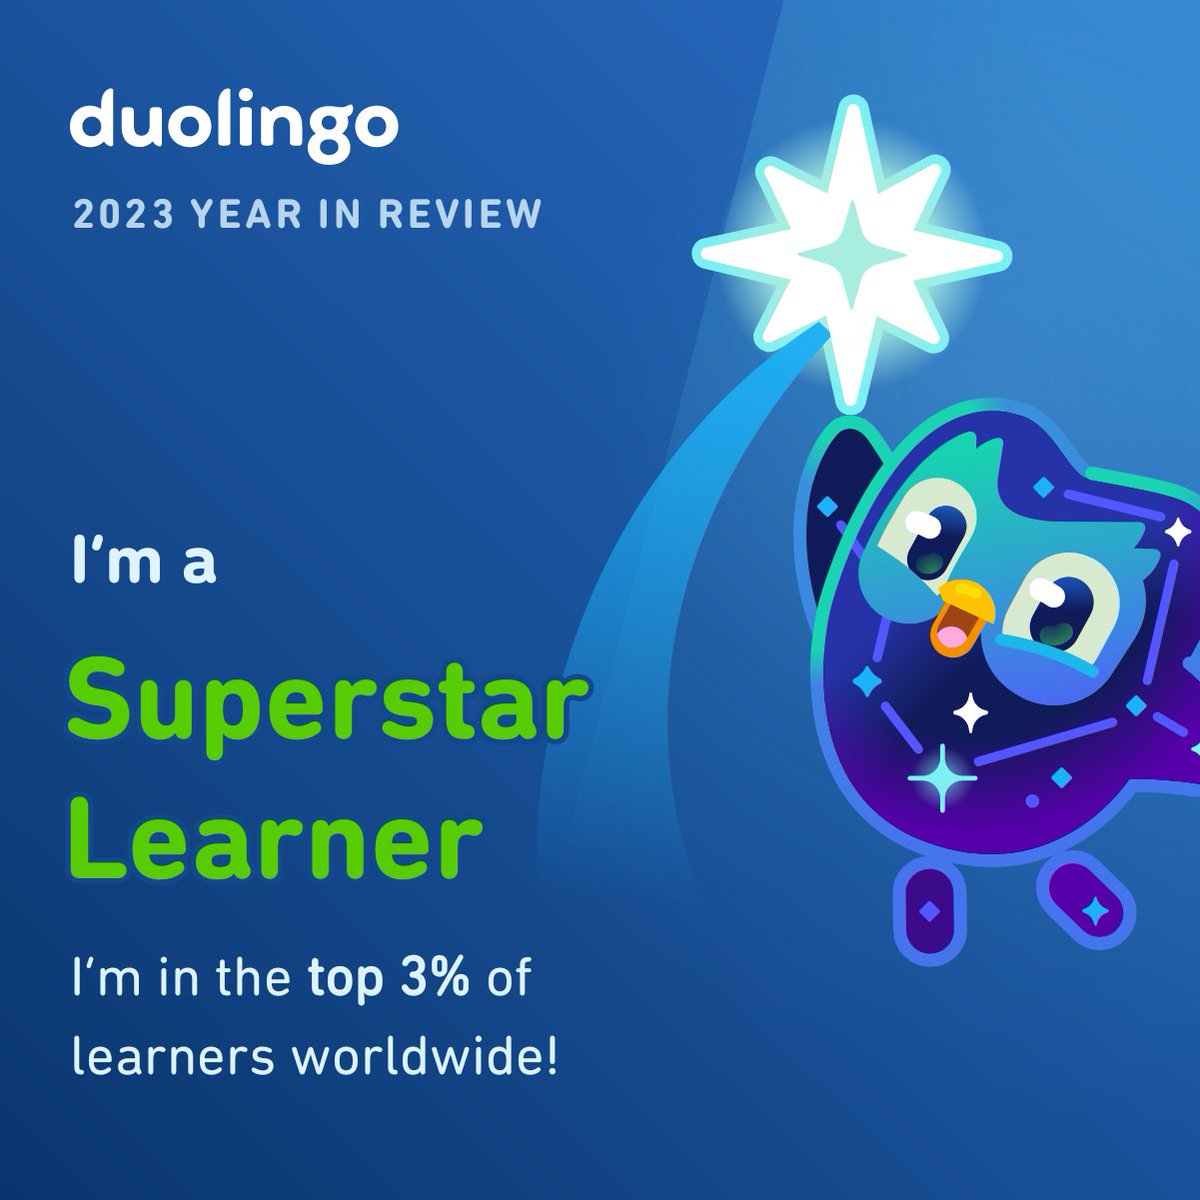 🥰🥰🥳I’m a Superstar Learner! What’s your Duolingo learner style? #Duolingo365